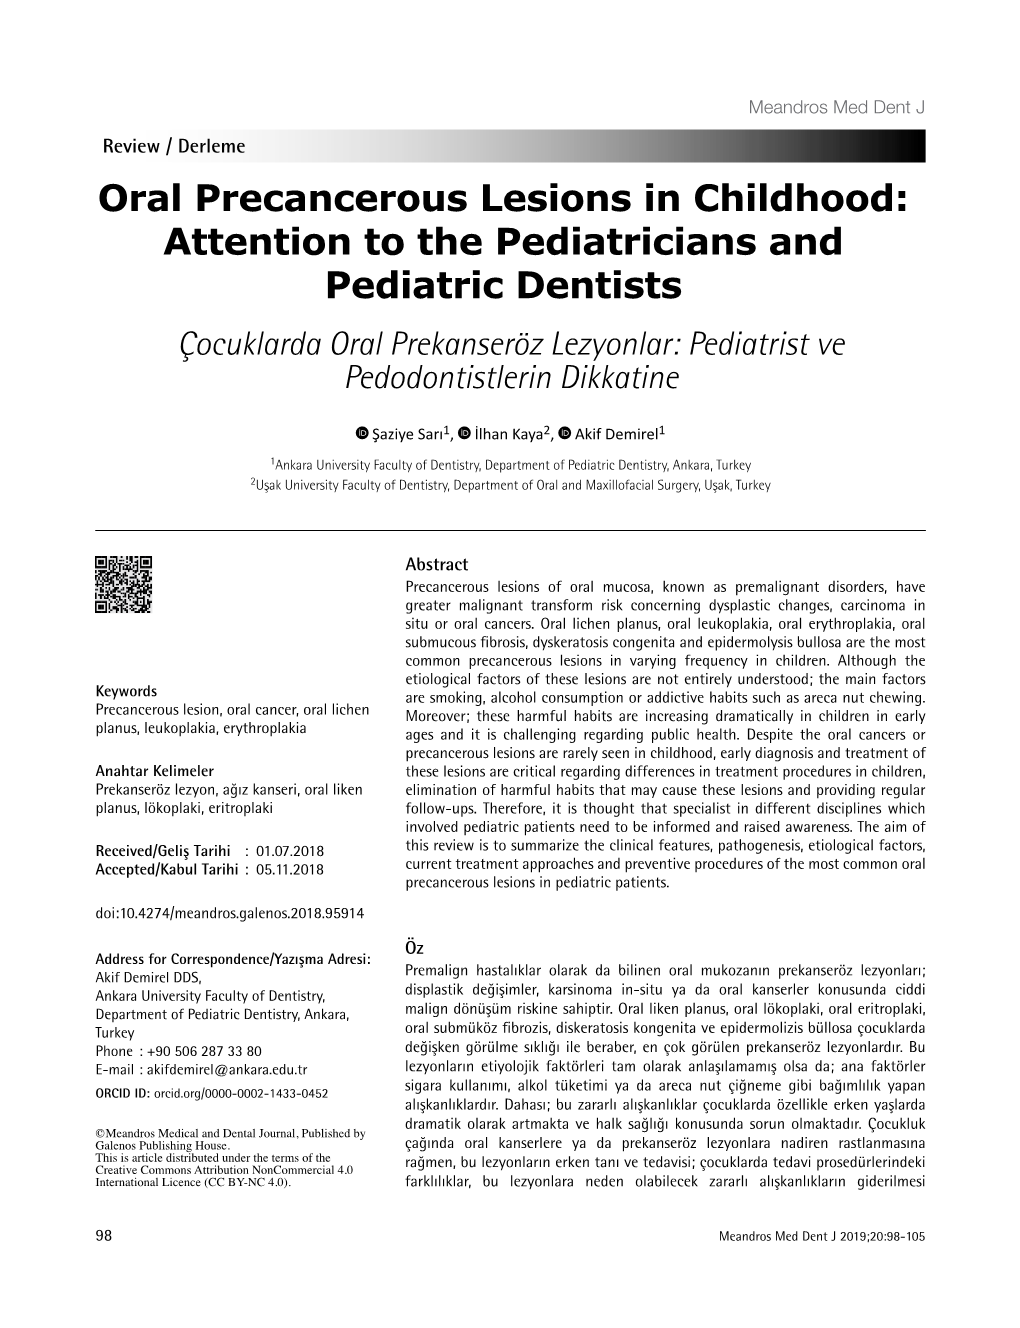 Oral Precancerous Lesions in Childhood: Attention to The